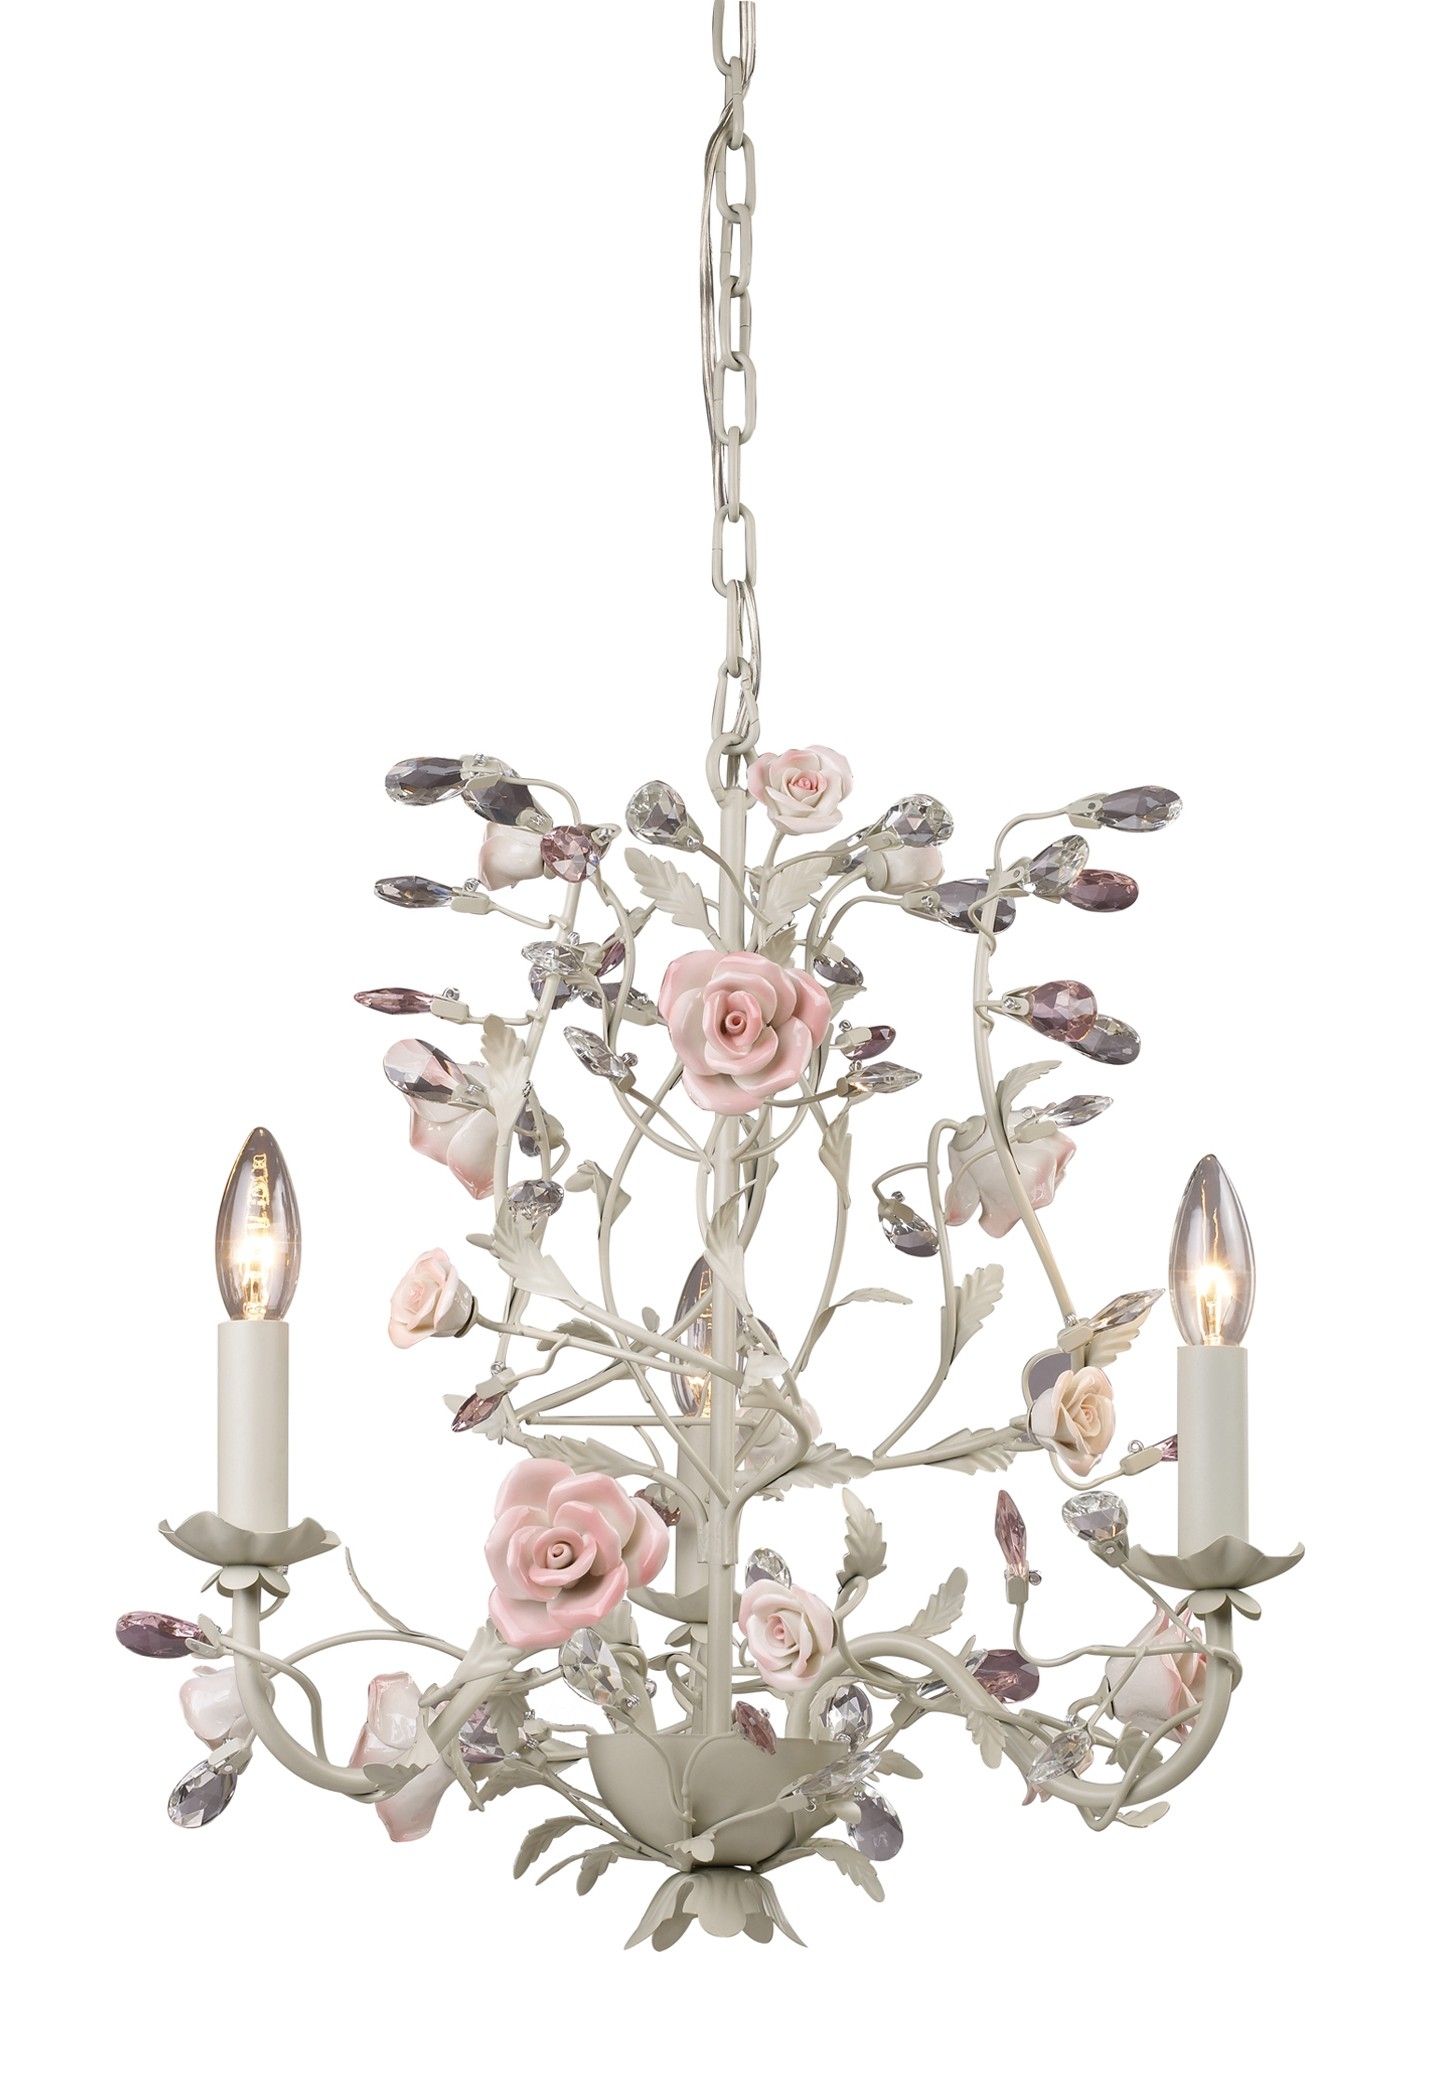 Light Flower Chandelier Would Love This For My Office Regarding Shabby Chic Chandeliers (View 3 of 12)